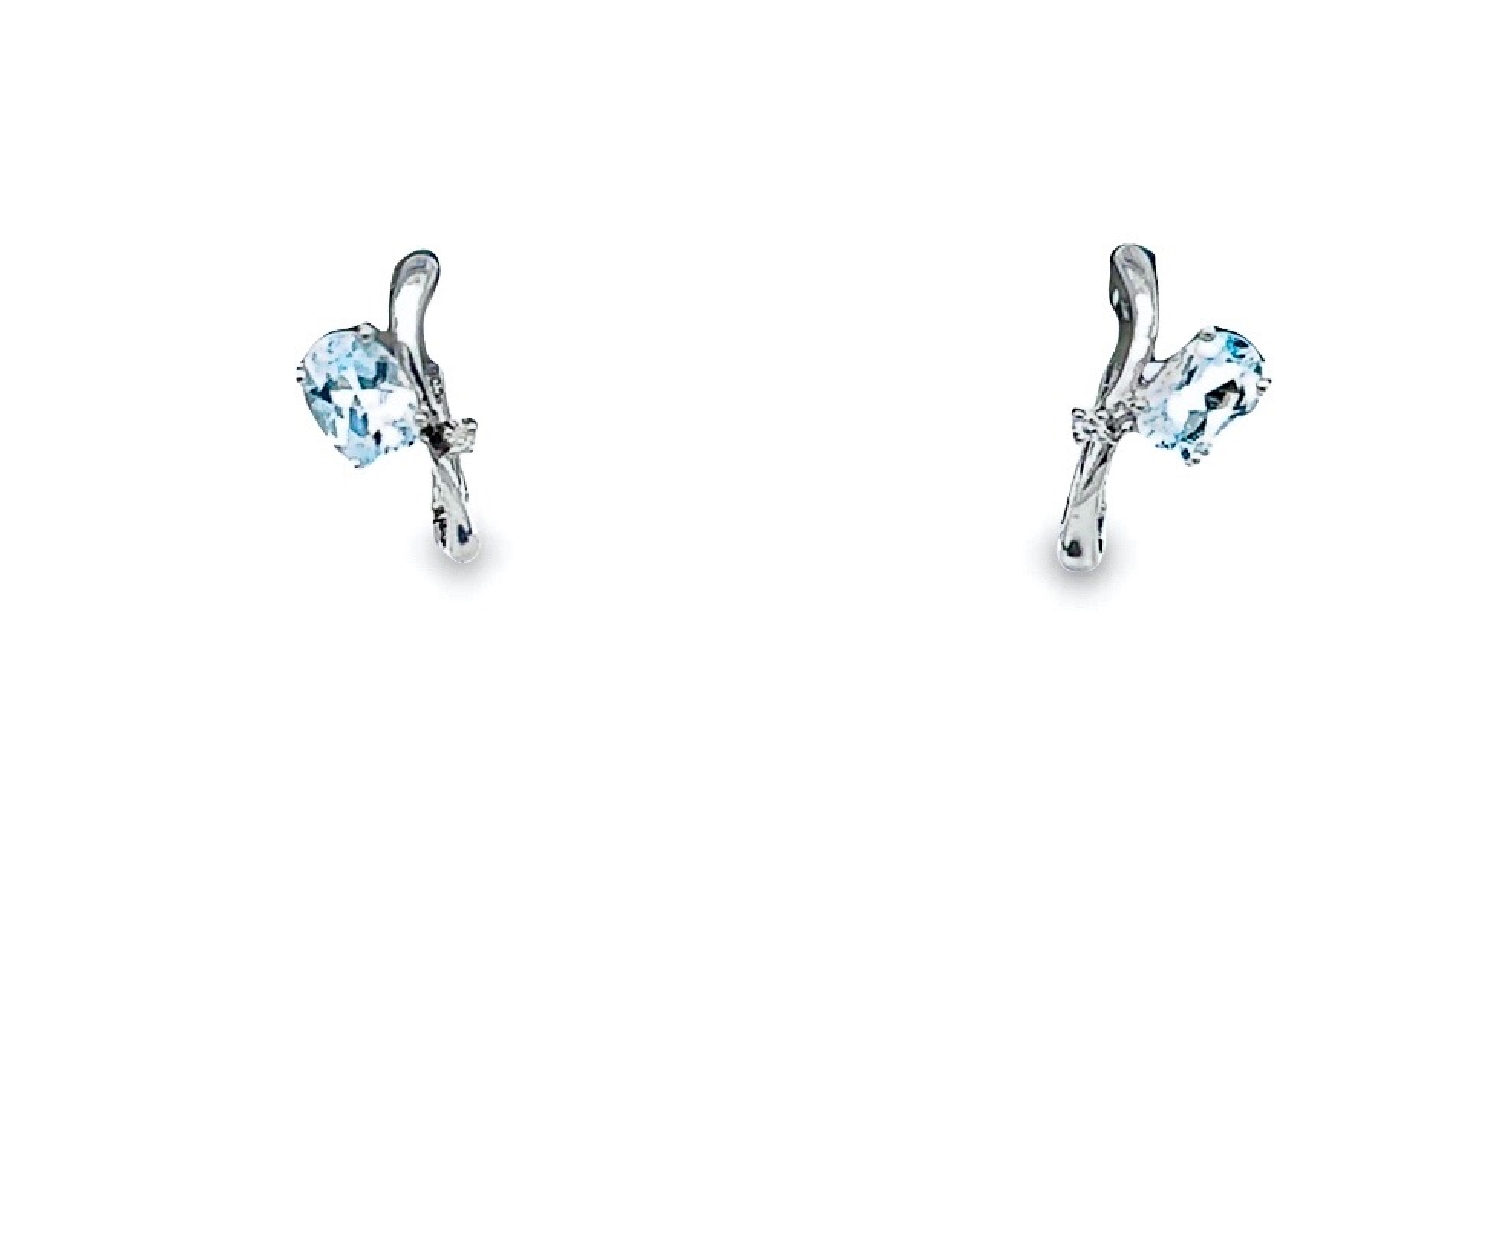 14K White Gold Aquamarine Earrings with Diamond Accents 